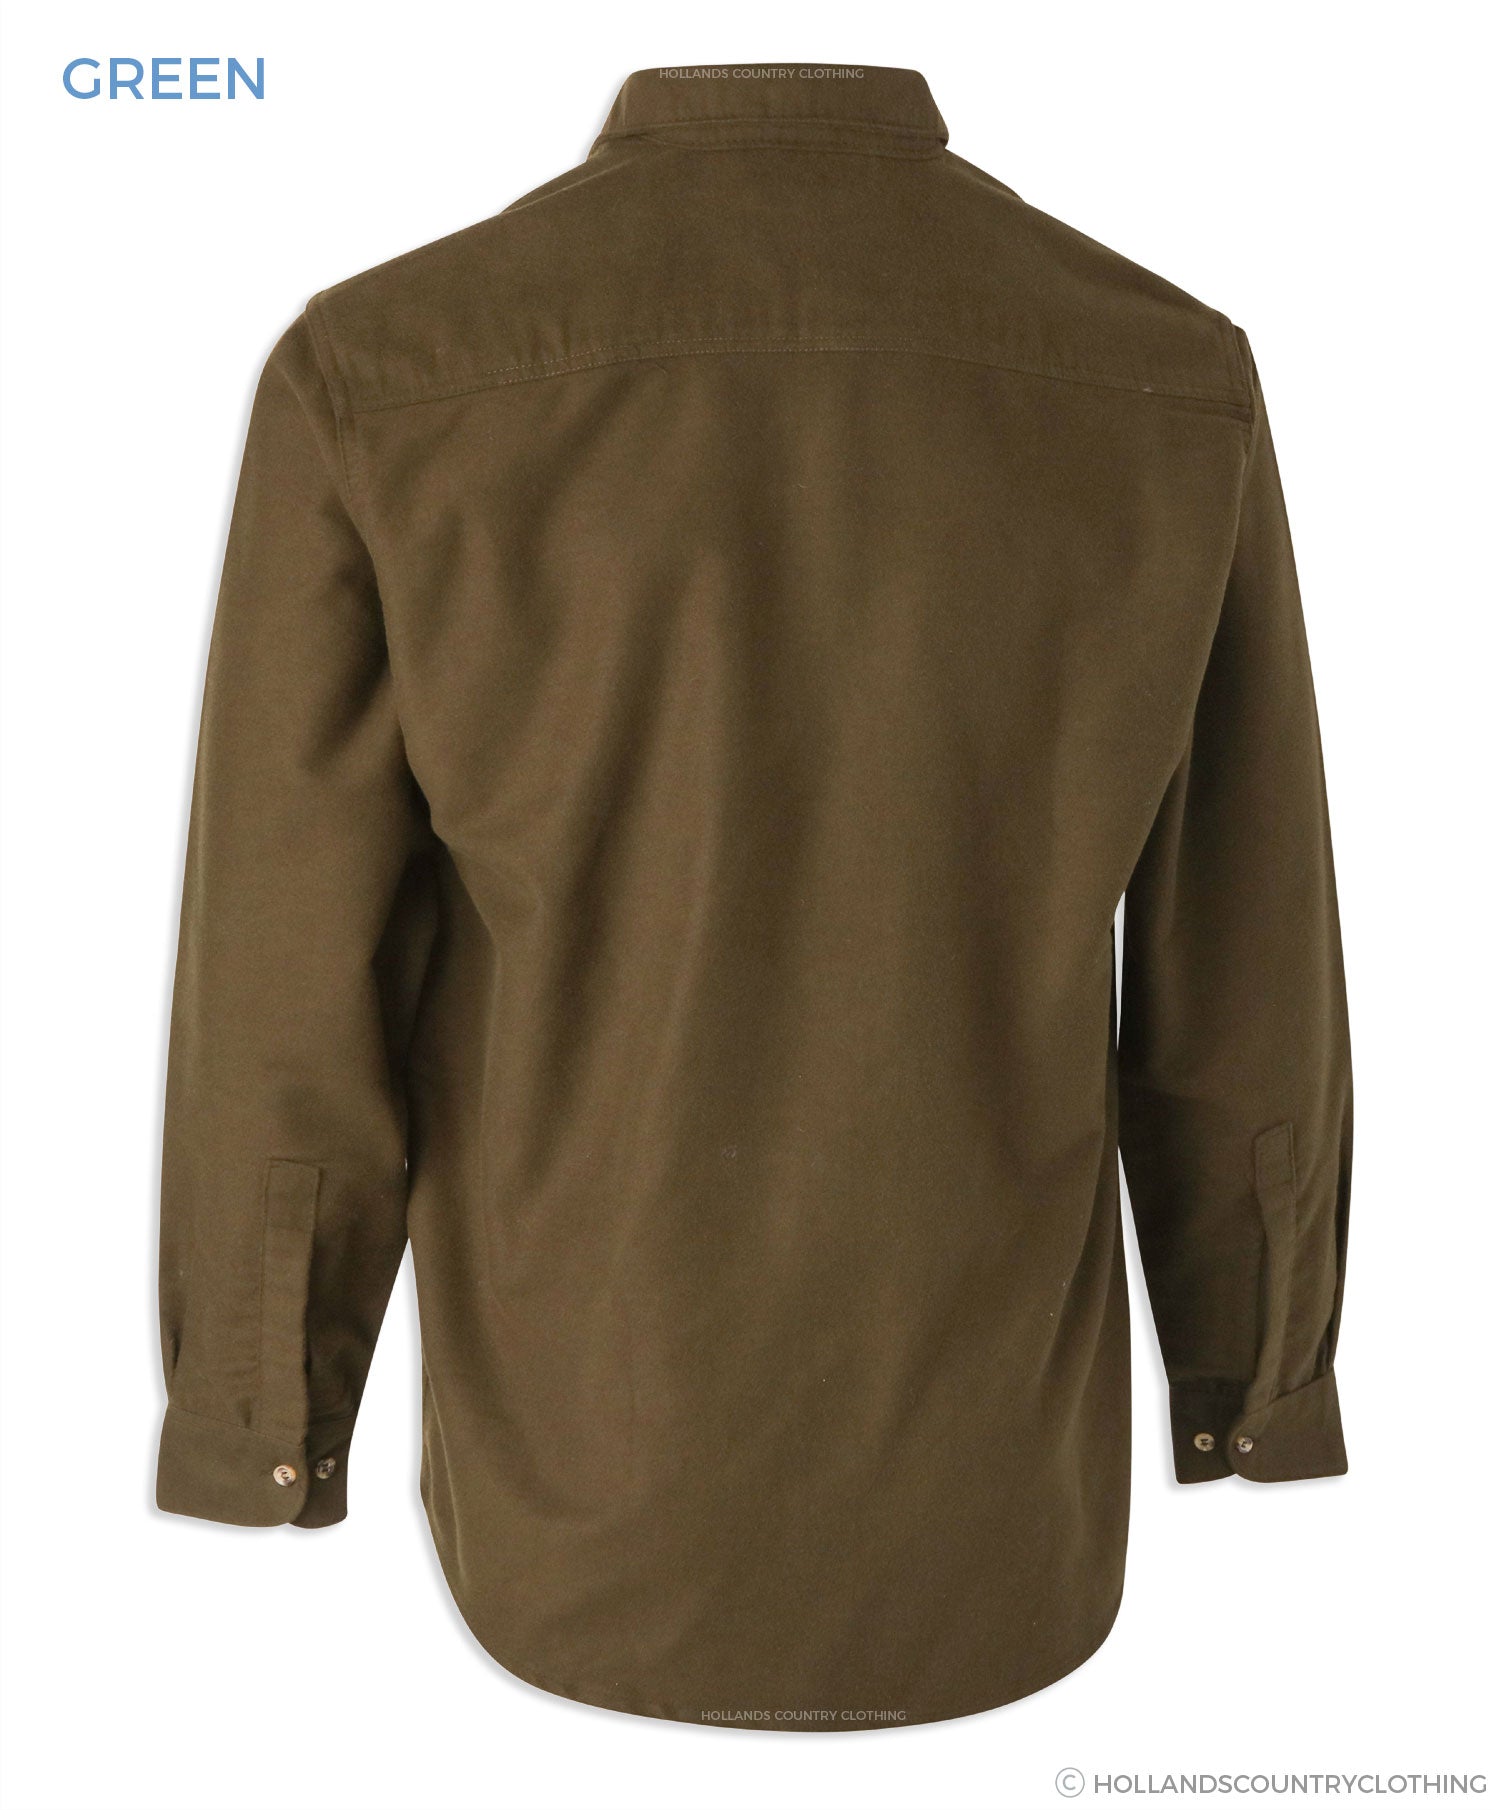 Back View superior quality Bronte Moleskin Country Shirt. Green 